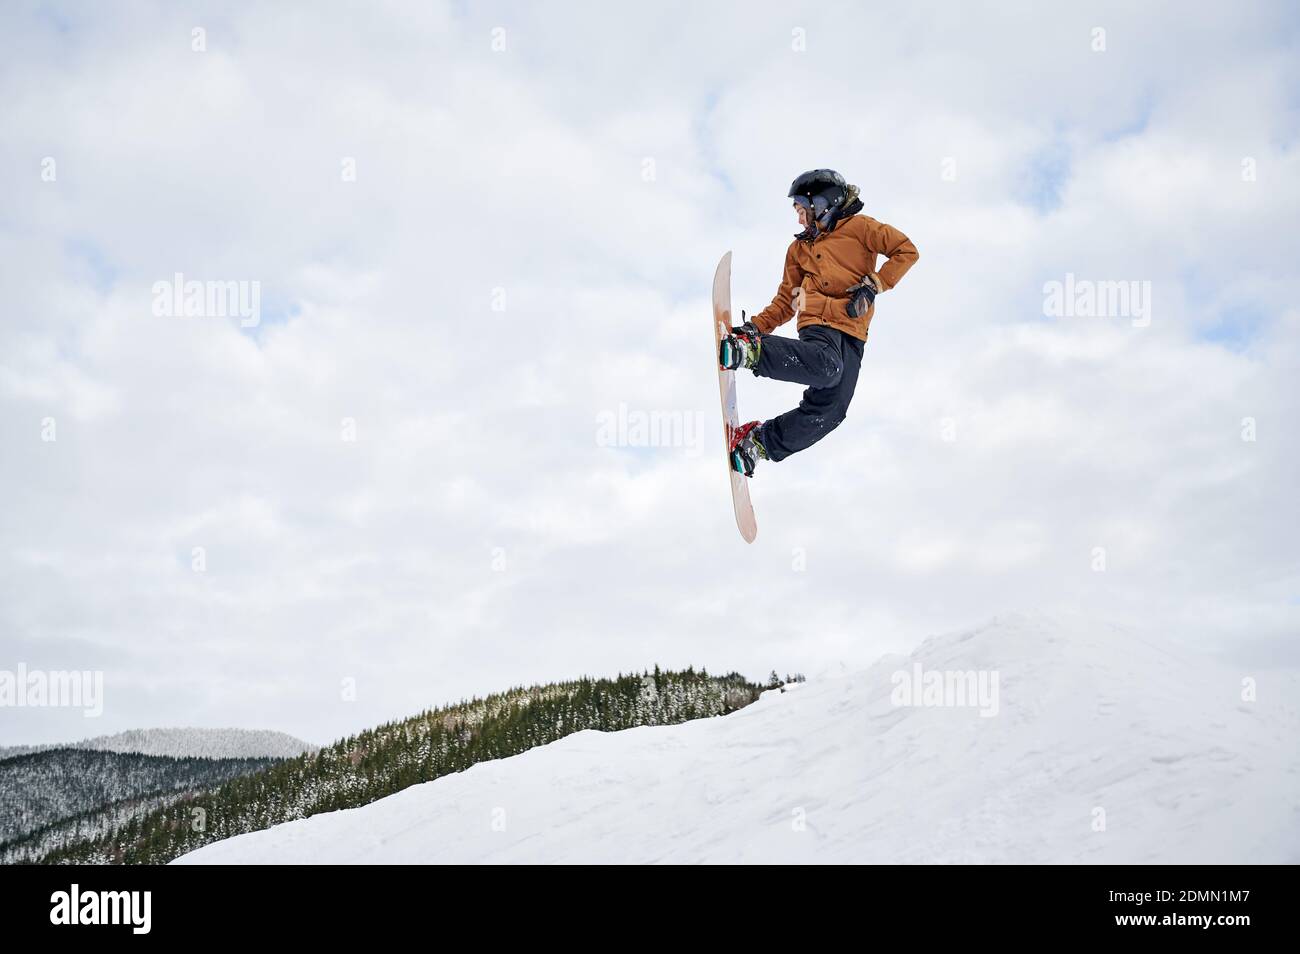 Guy snowboarder in winter jacket and helmet jumping in the air. Adorable kid making jump with snowboard while sliding down snowy hill in winter mountains. Concept of winter sport activities. Stock Photo